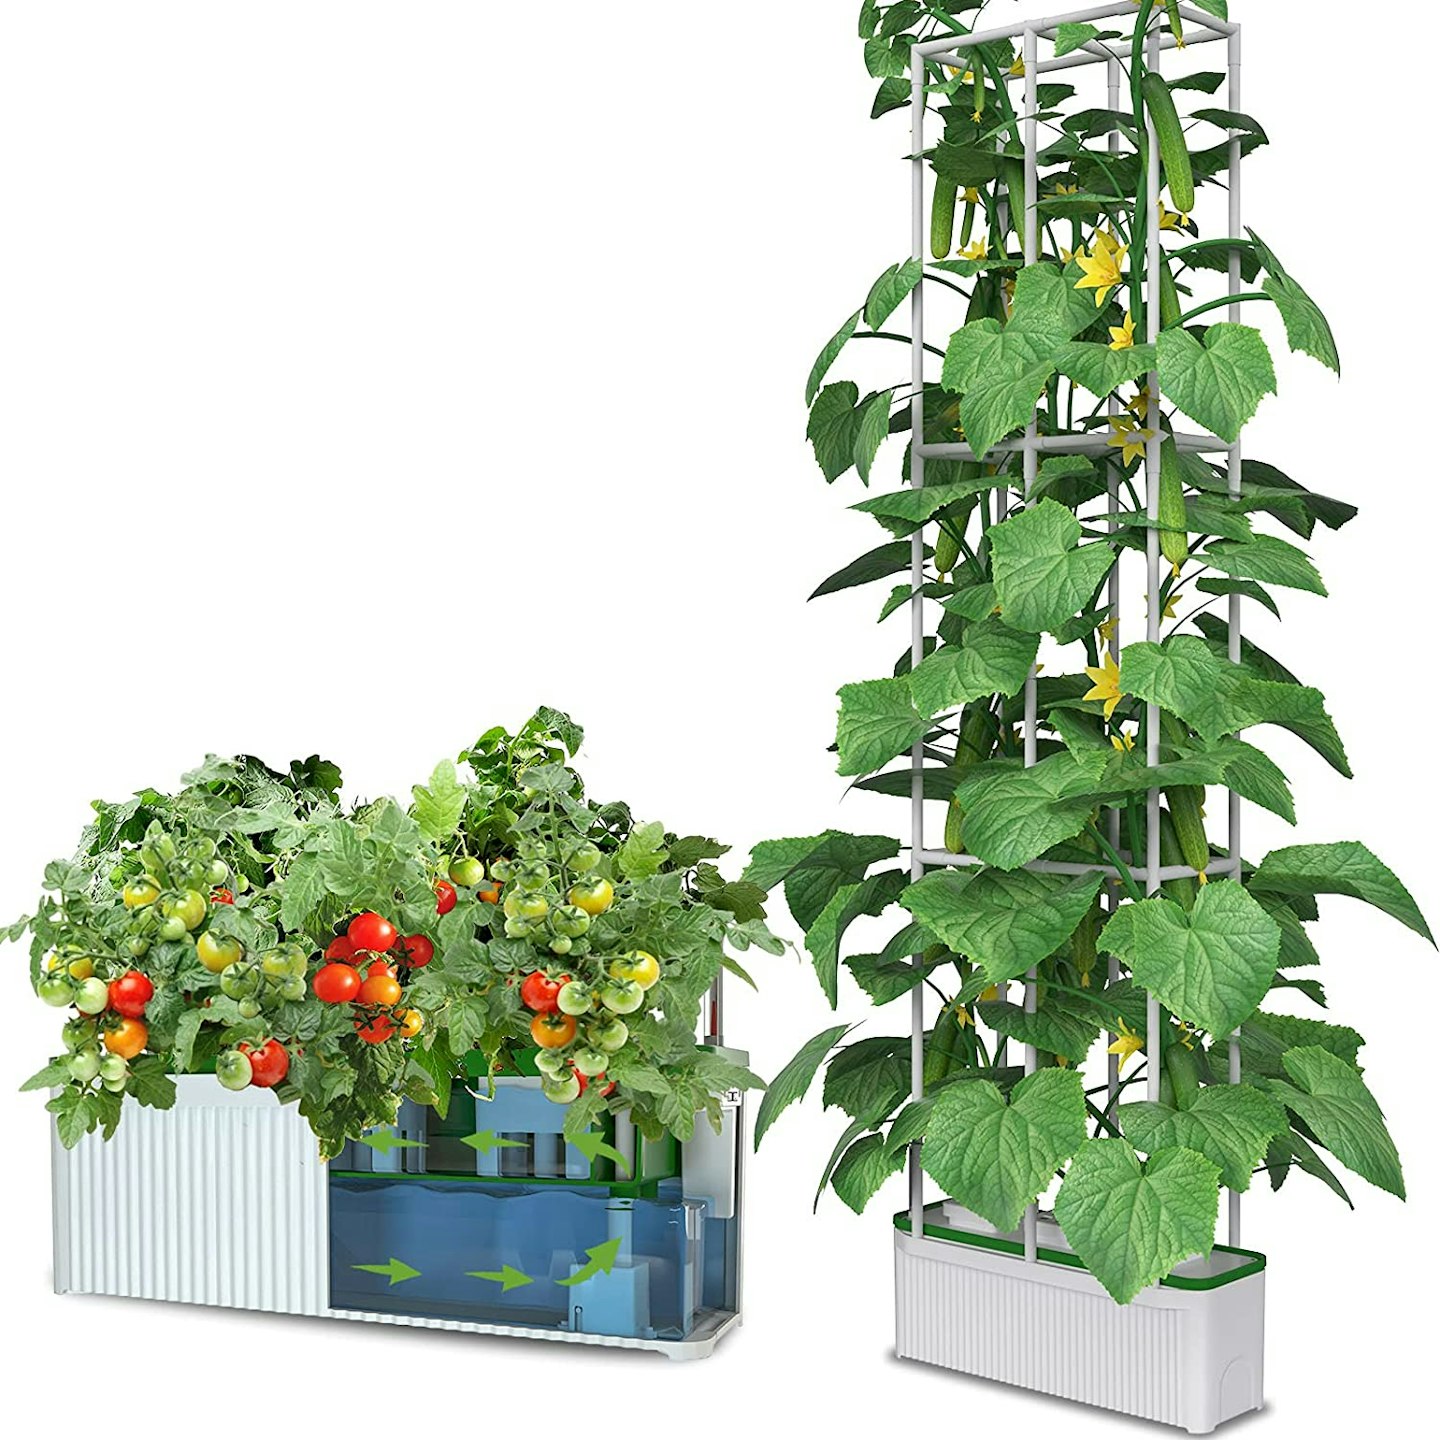 eSuperegrow Hydroponics Growing System 7L with Trellis